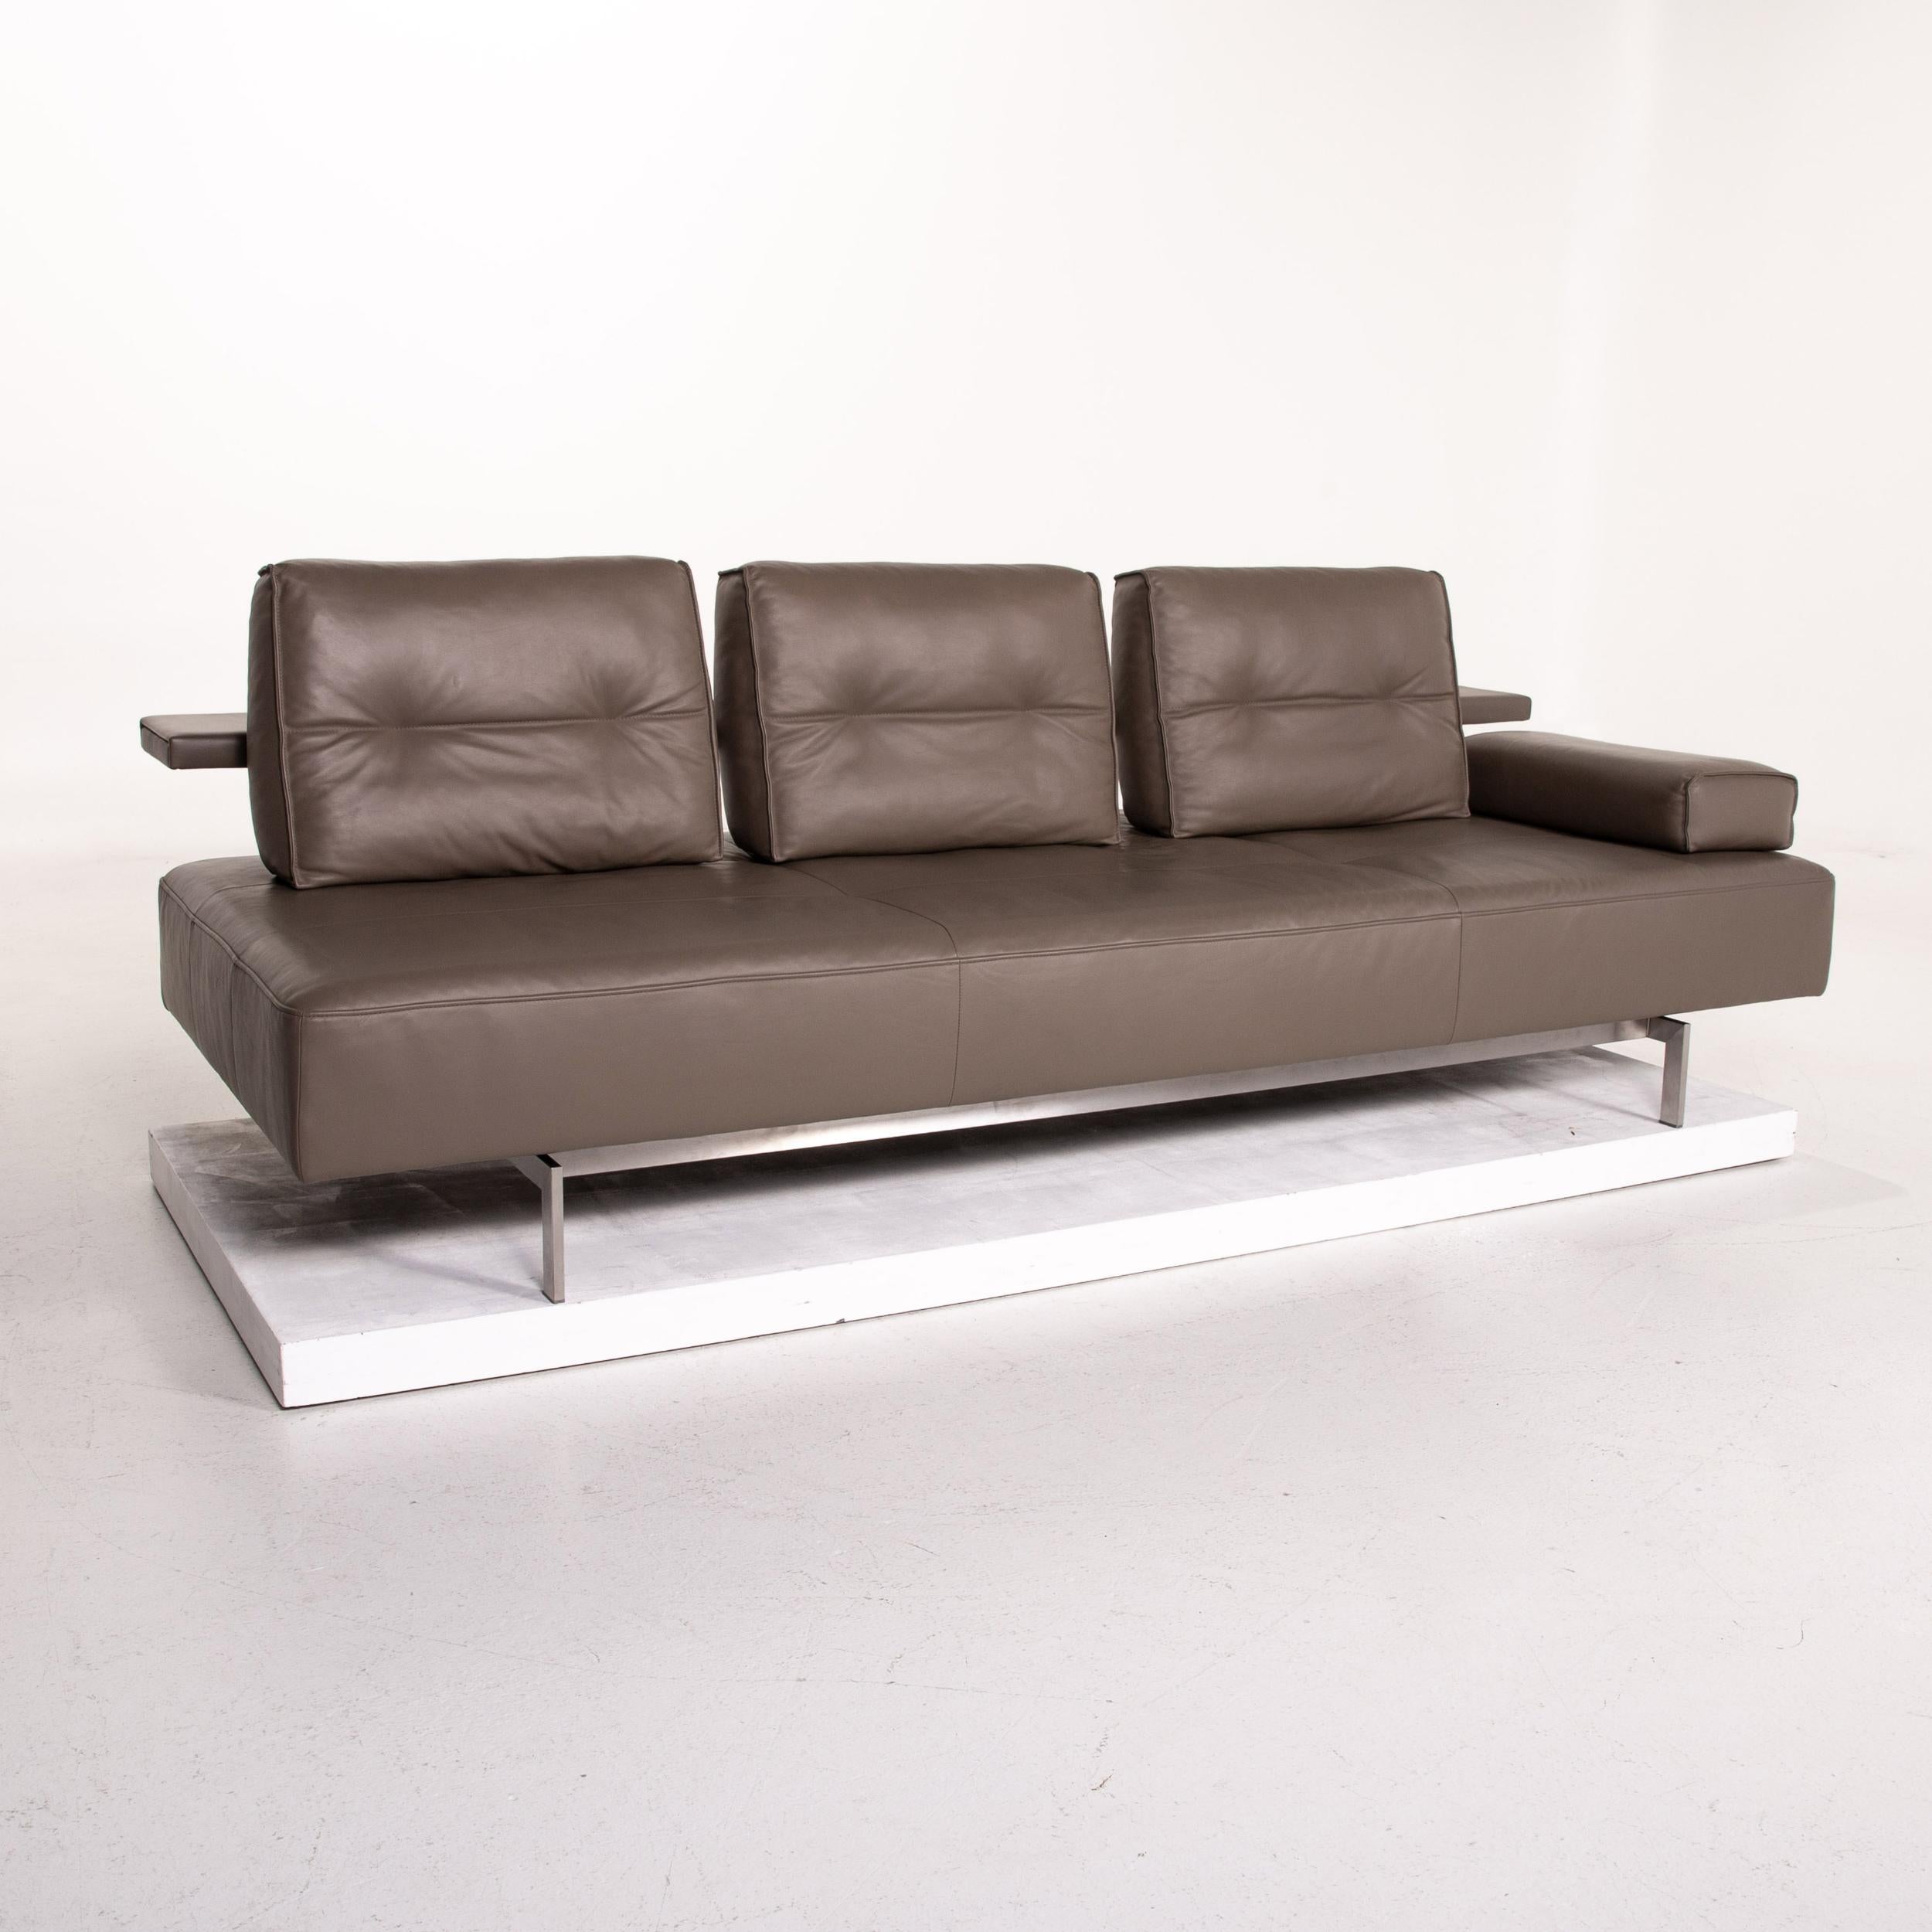 Contemporary Rolf Benz Dono Leather Sofa Brown Three-Seat Couch For Sale